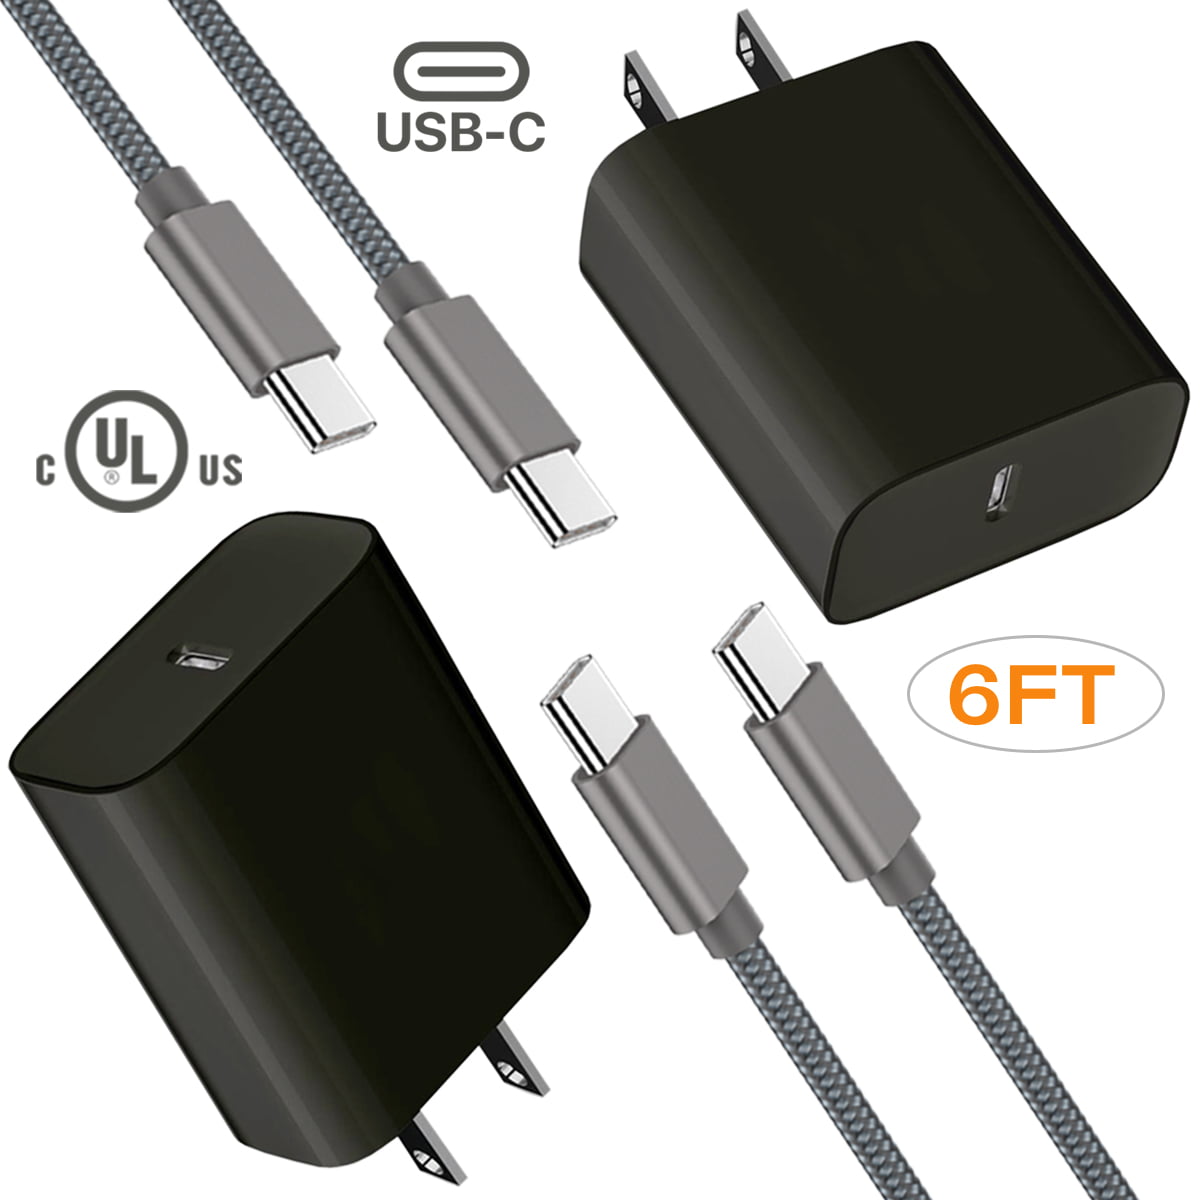 USB-C Charger with 18W Power Delivery 3.0, Quick Charger Set Compatible with Samsung Galaxy Note10, Note10+, Note10+ 5G, 2x Type-C Cable (6ft) + 2x Wall Charger, 60% faster charging